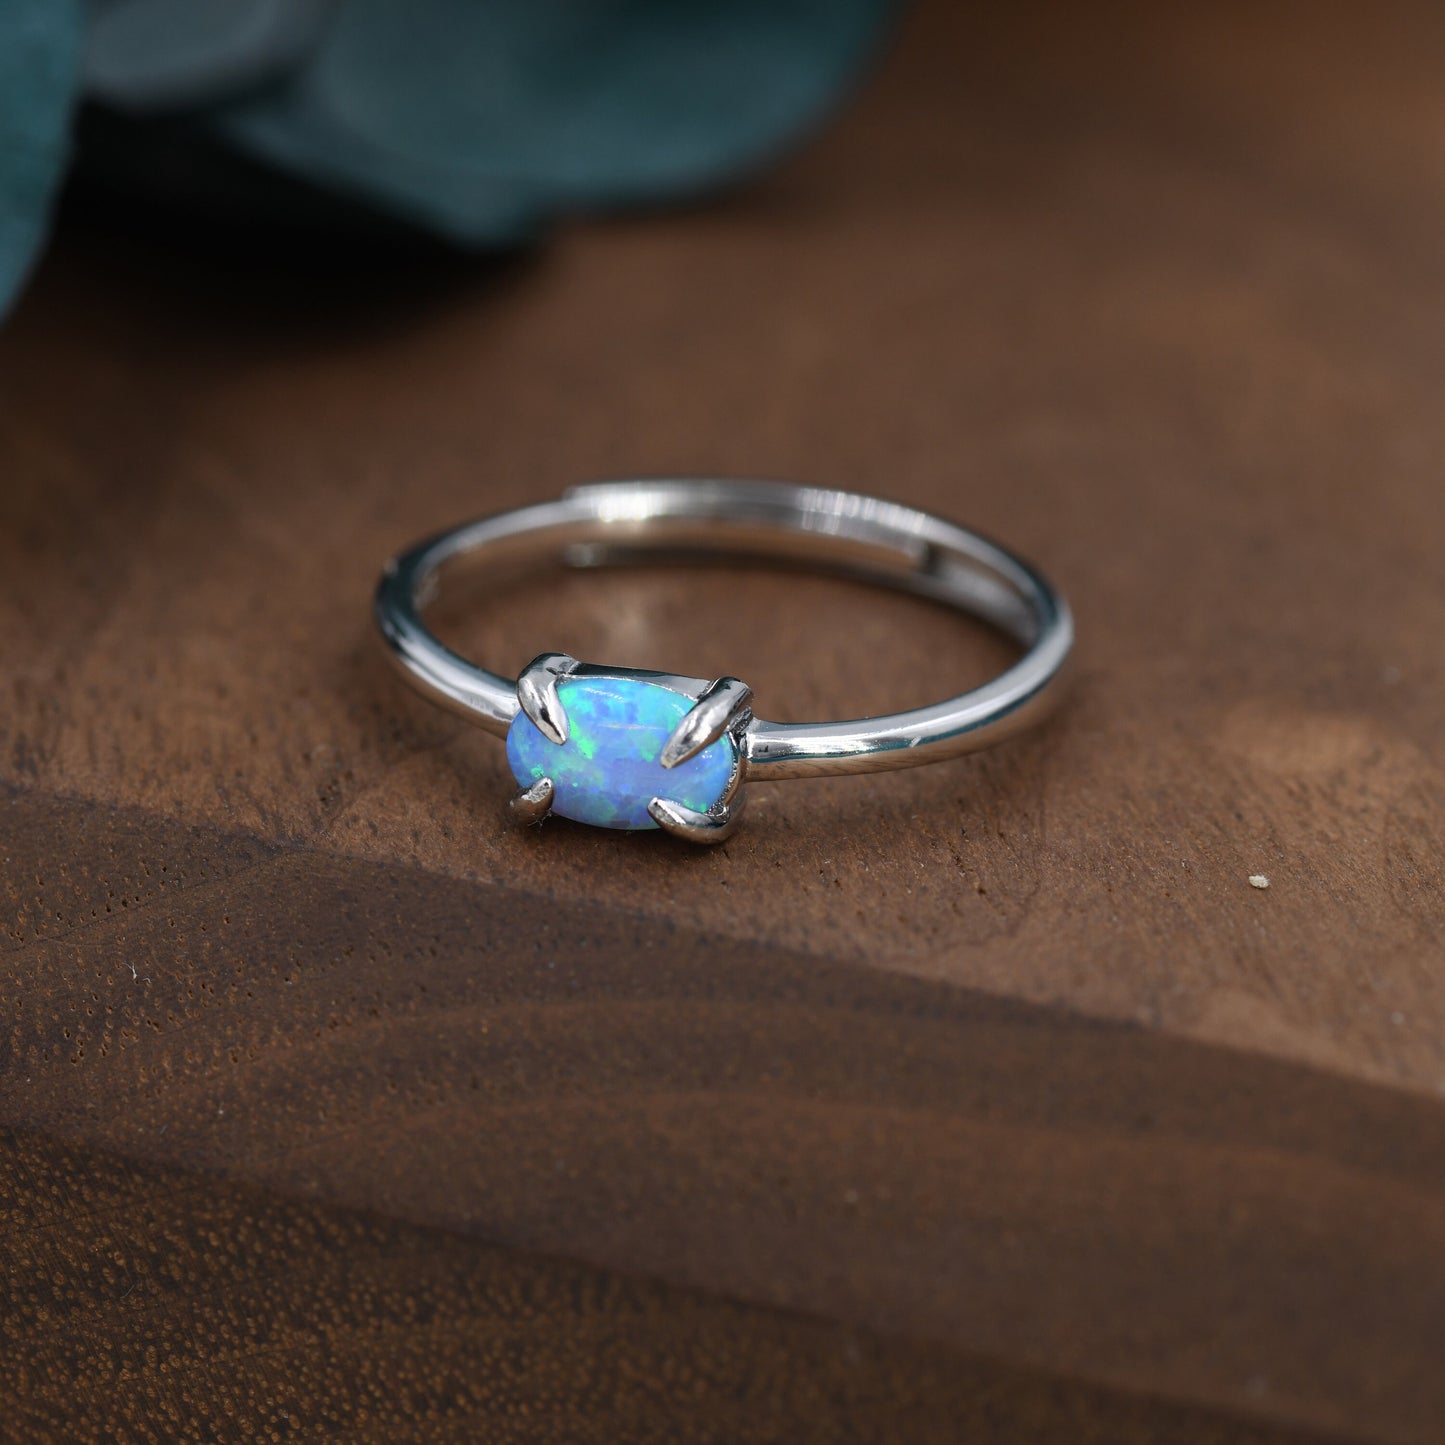 Clawed Blue Opal Oval Ring in Sterling Silver, Adjustable Size Opal Ring, Prong Set, Lab Opal Stone Ring, Opal Ring, Delicate Stacking Ring